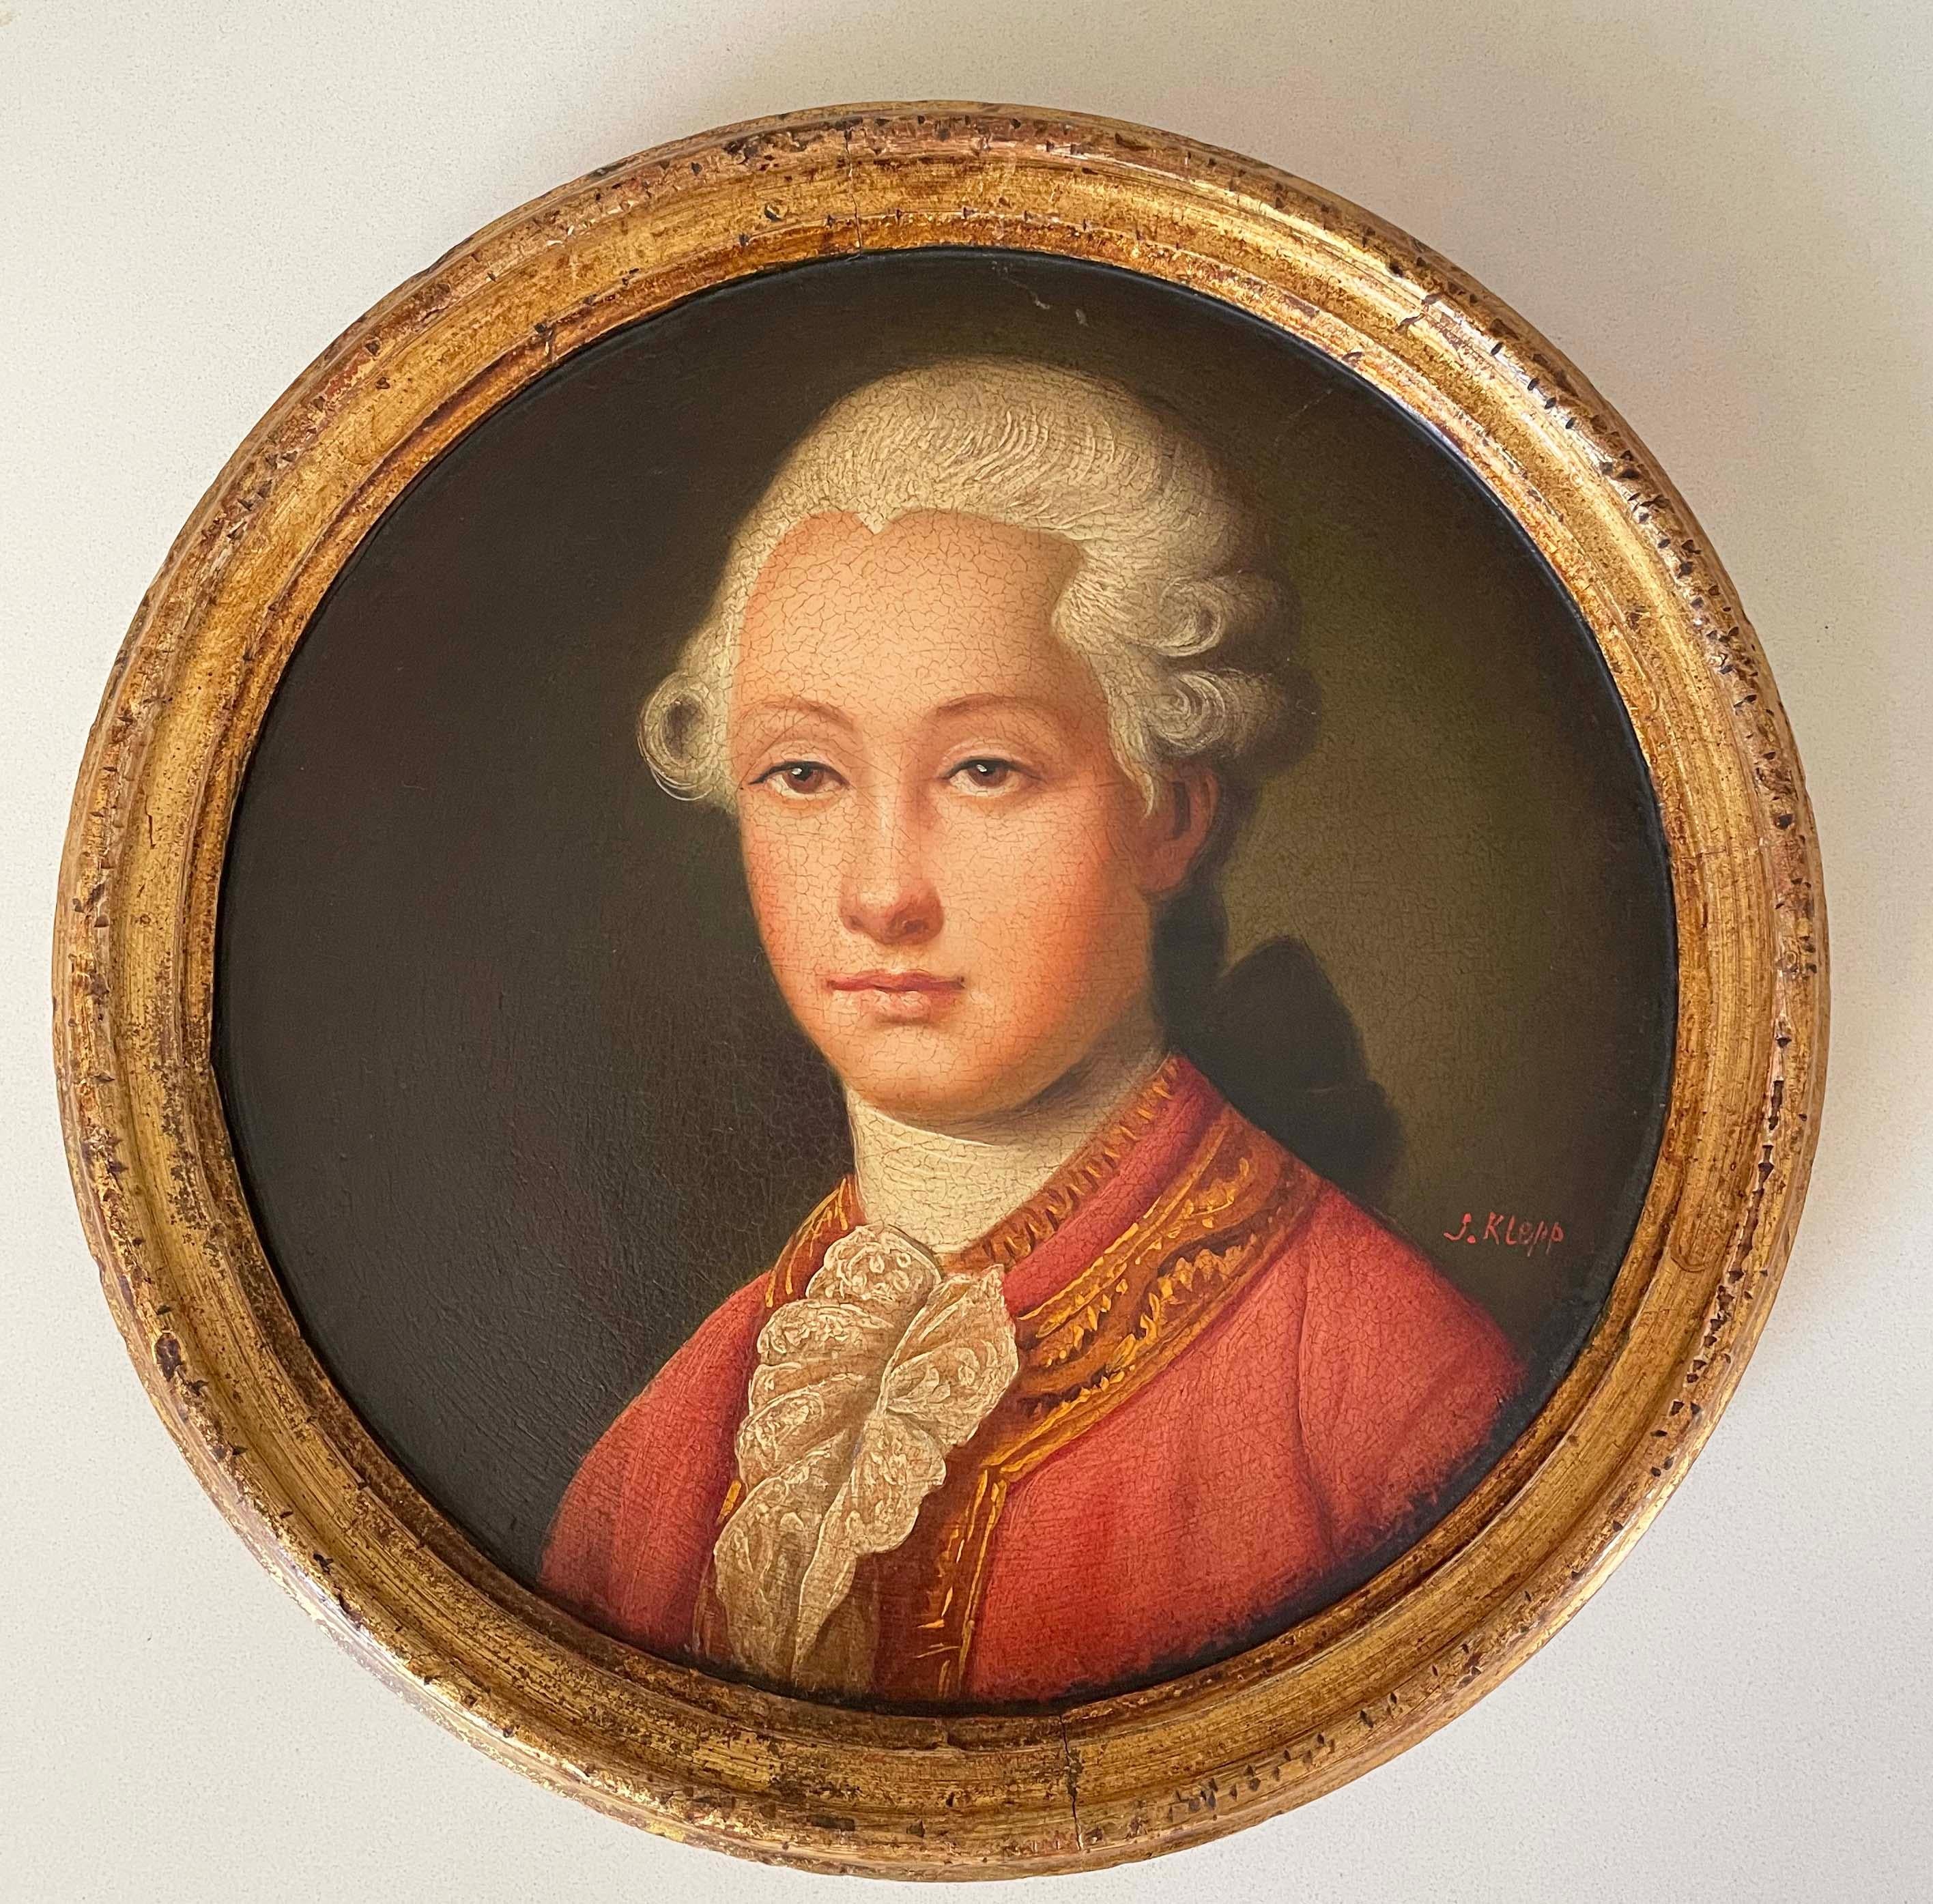 A set of four decorative portraits in original circular gilt and gesso frames including Portrait Of A Child - Maria Teresa of Savoy.

Oil on board, each work signed 'J Klepp'.

Little is know of this artist but it is believed that they were working